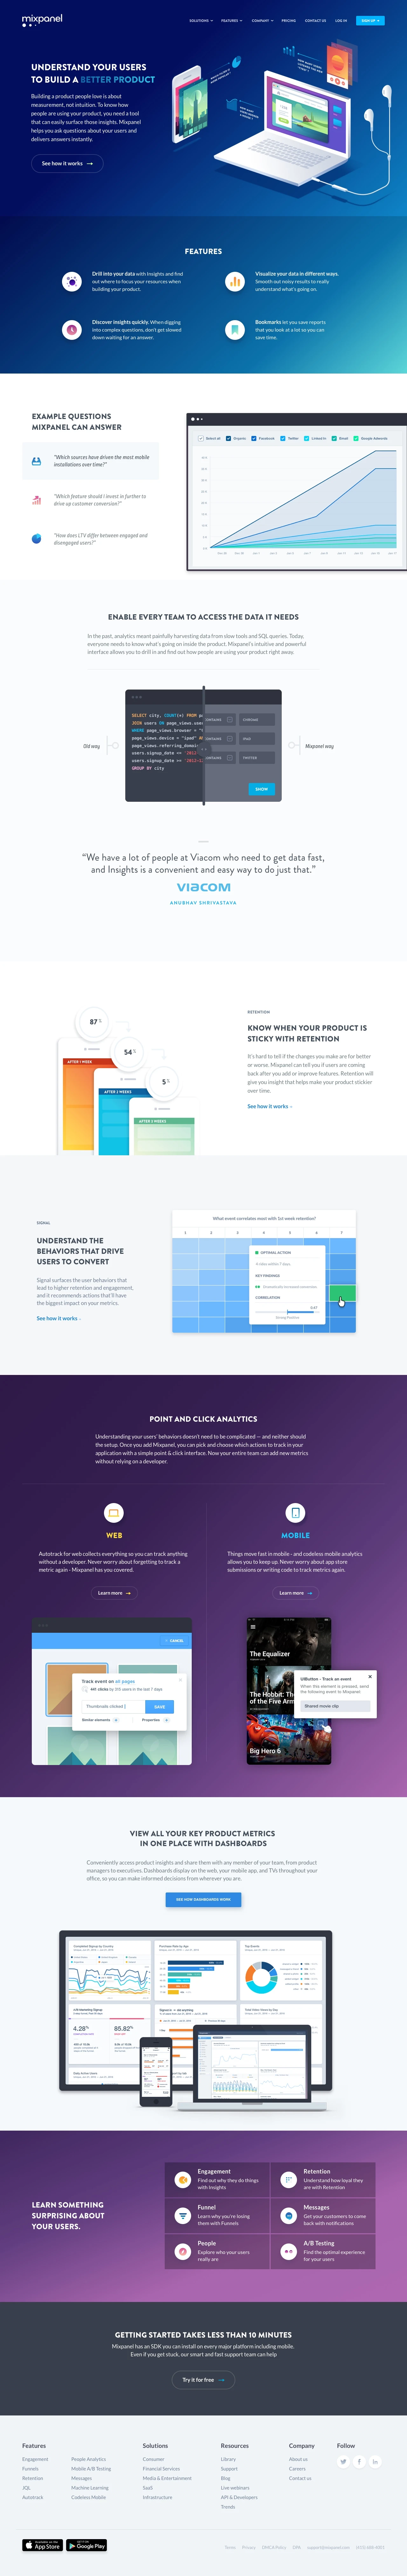 Mixpanel Landing Page Example: Building a product people love is about measurement, not intuition. Mixpanel helps you ask questions about your users and delivers answers instantly.